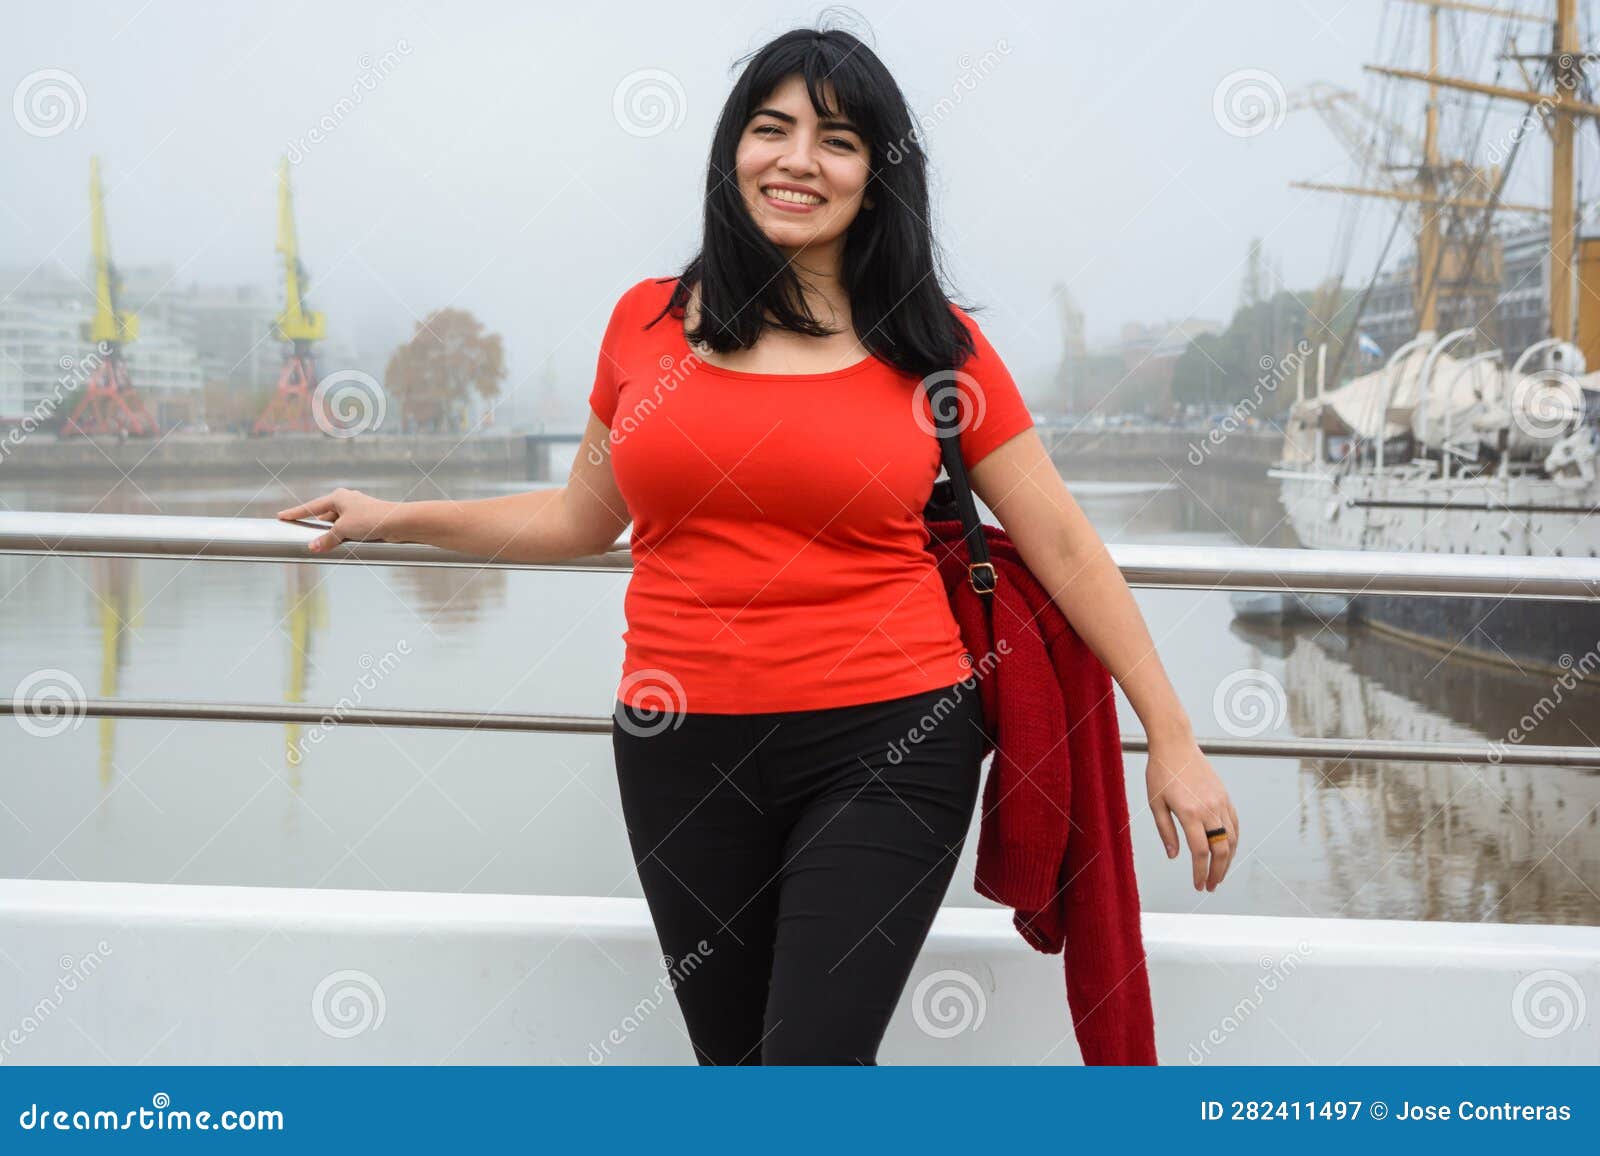 young tourist standing looking at the camera on the puente de la mujer on a cloudy day with mist